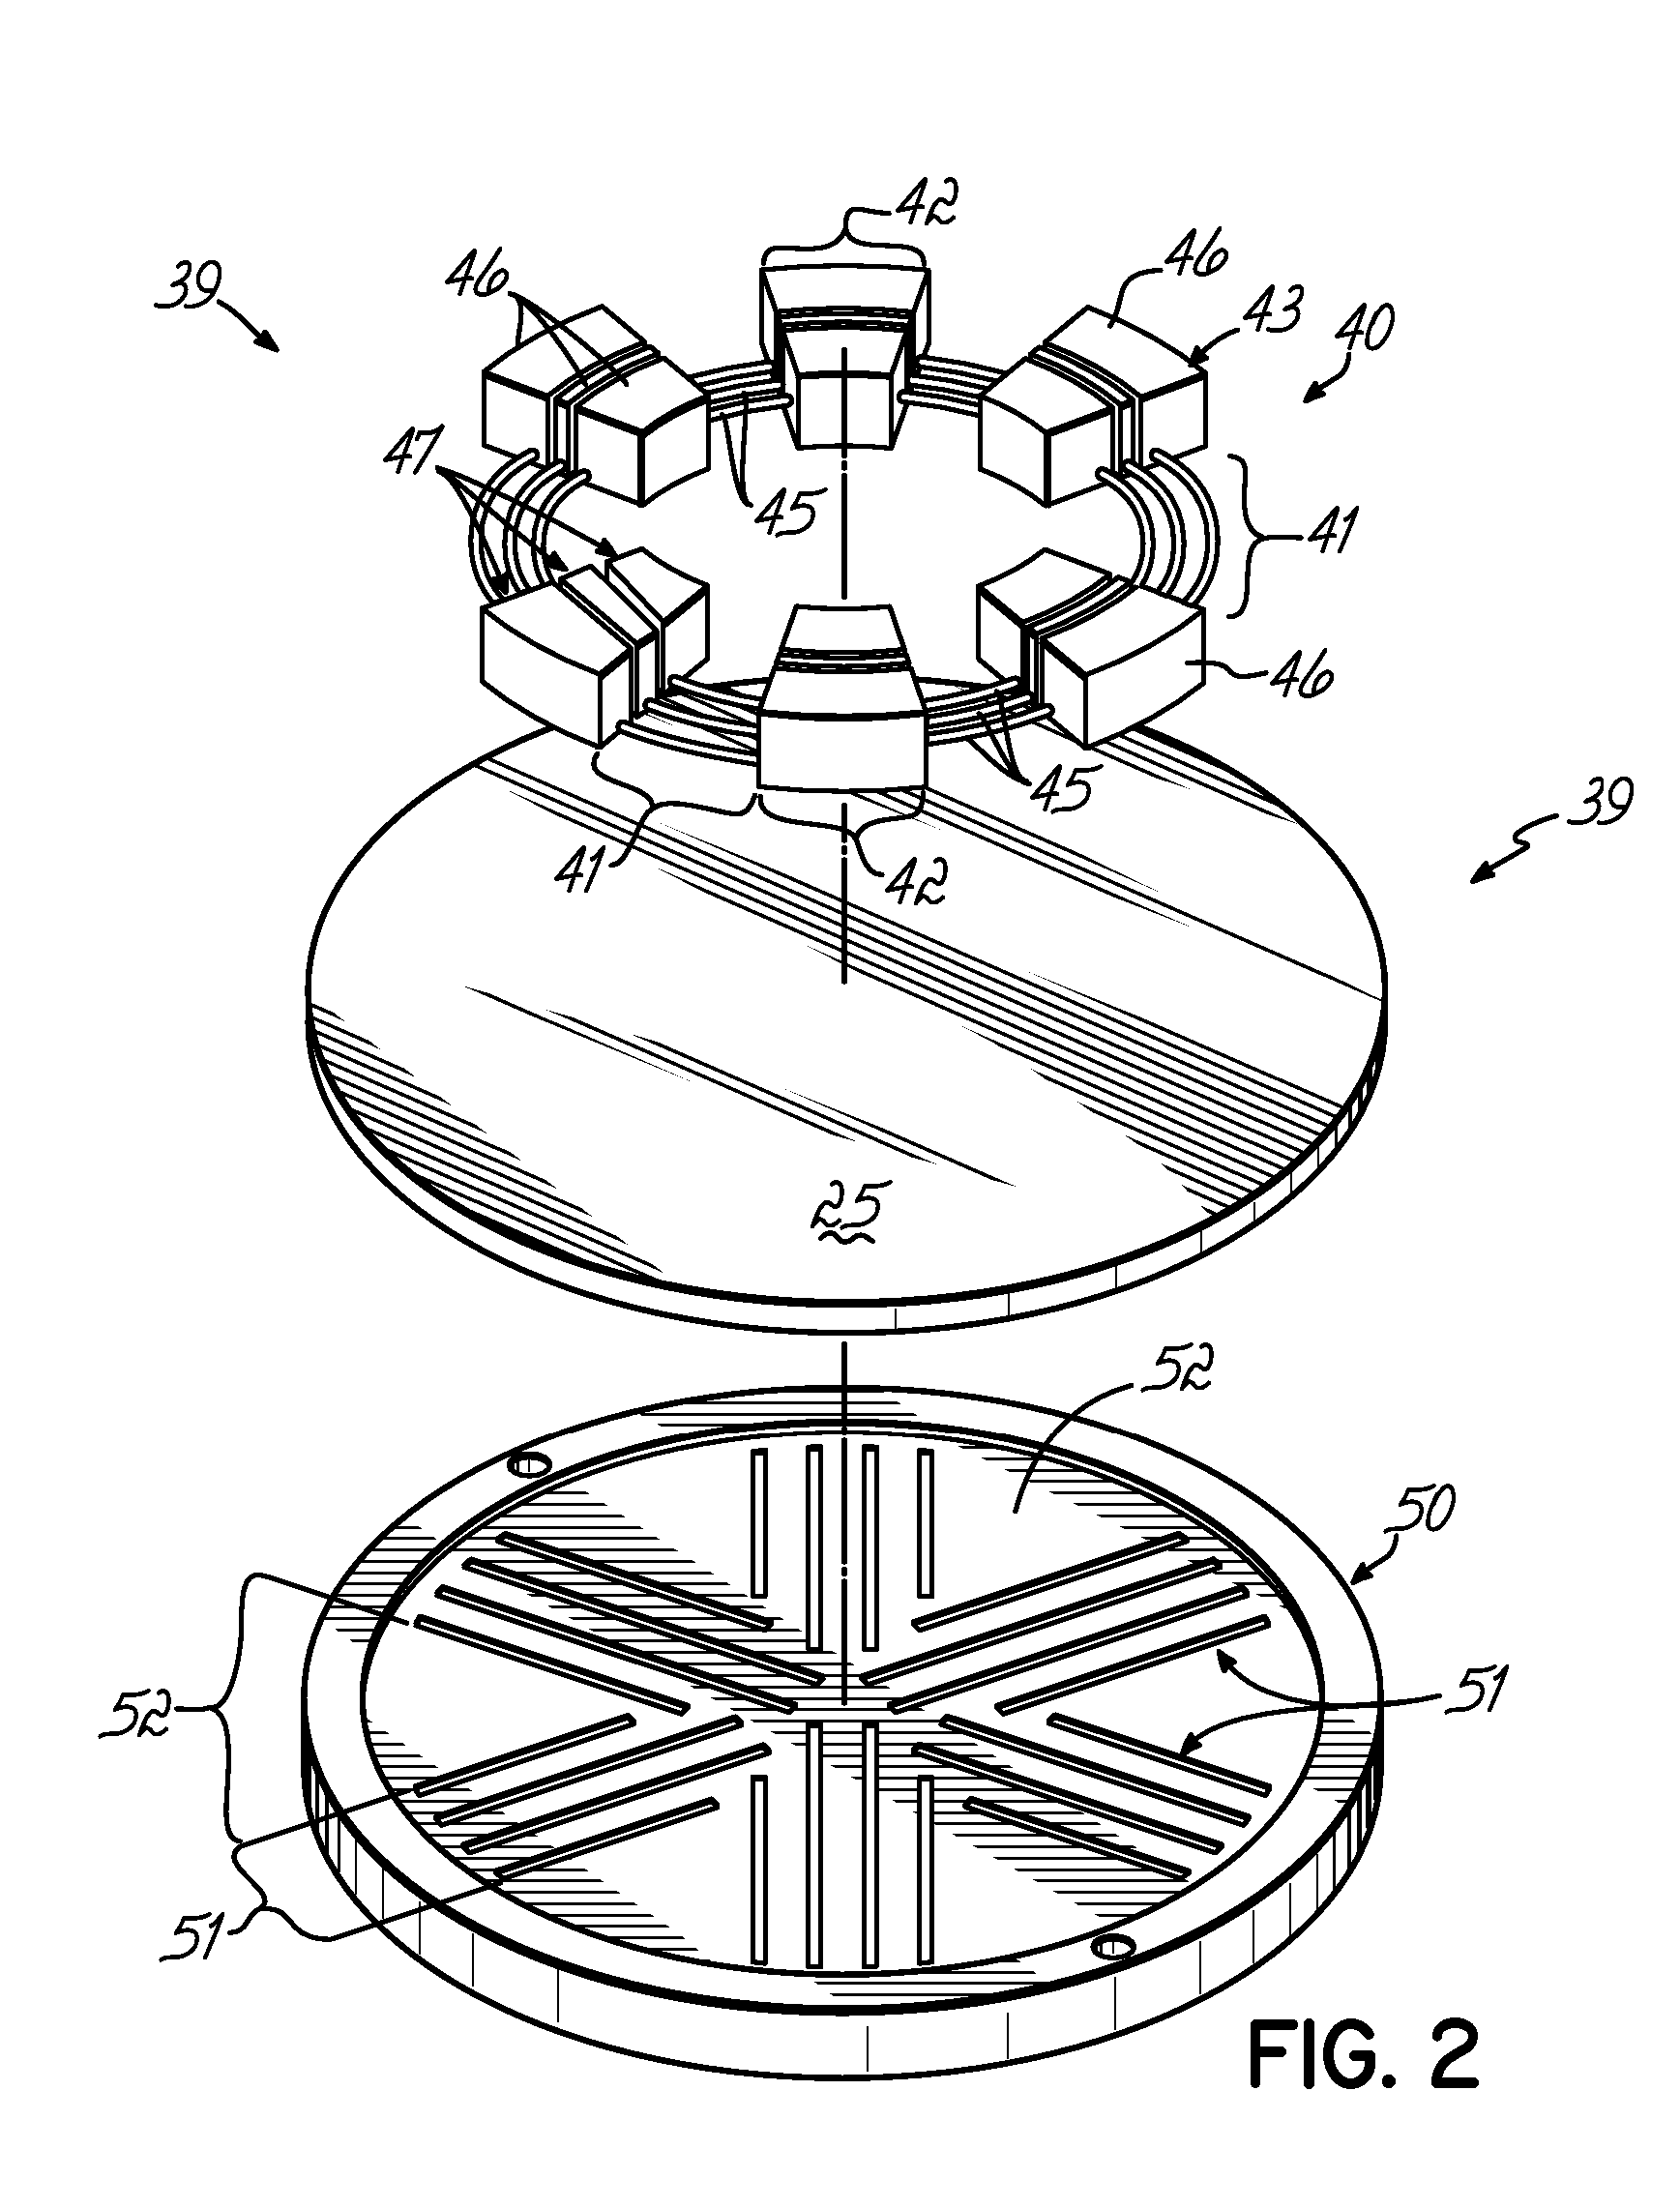 Locally-efficient inductive plasma coupling for plasma processing system